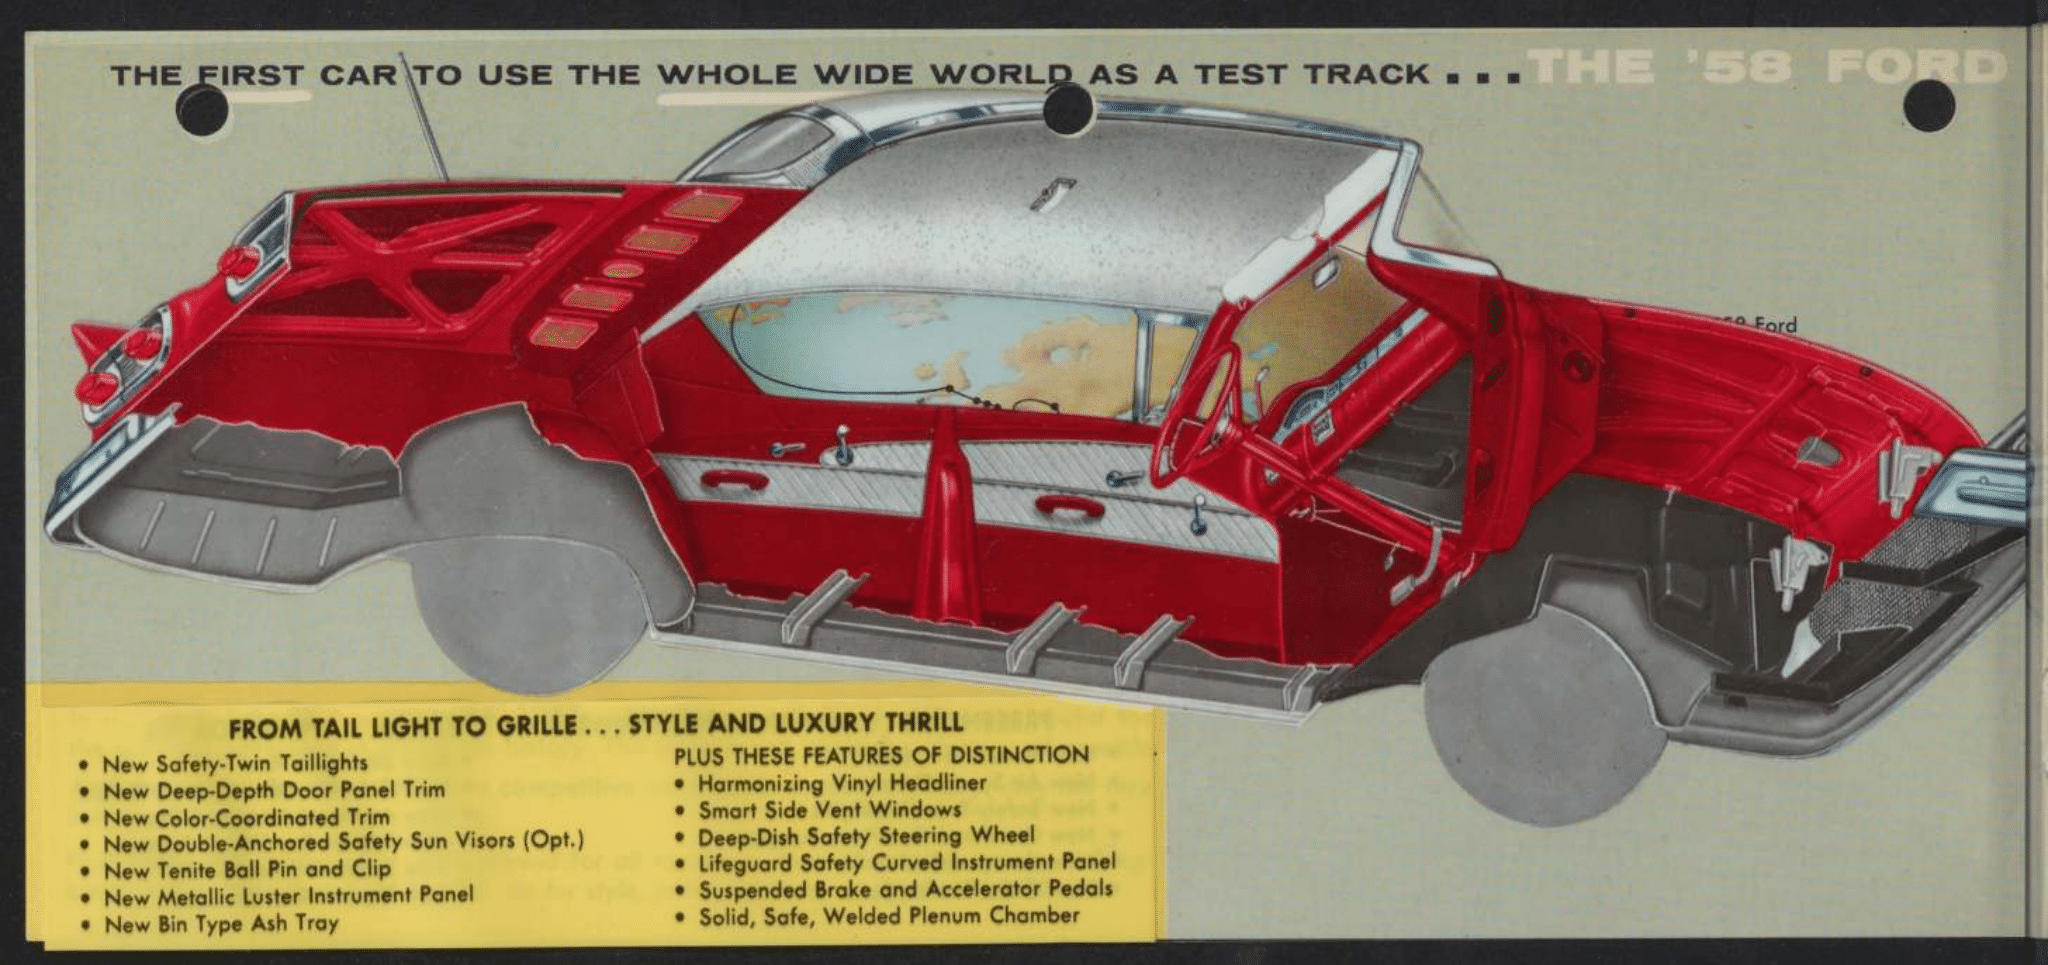 Fords for 1958 (4).png-2023-5-14 13.0.26